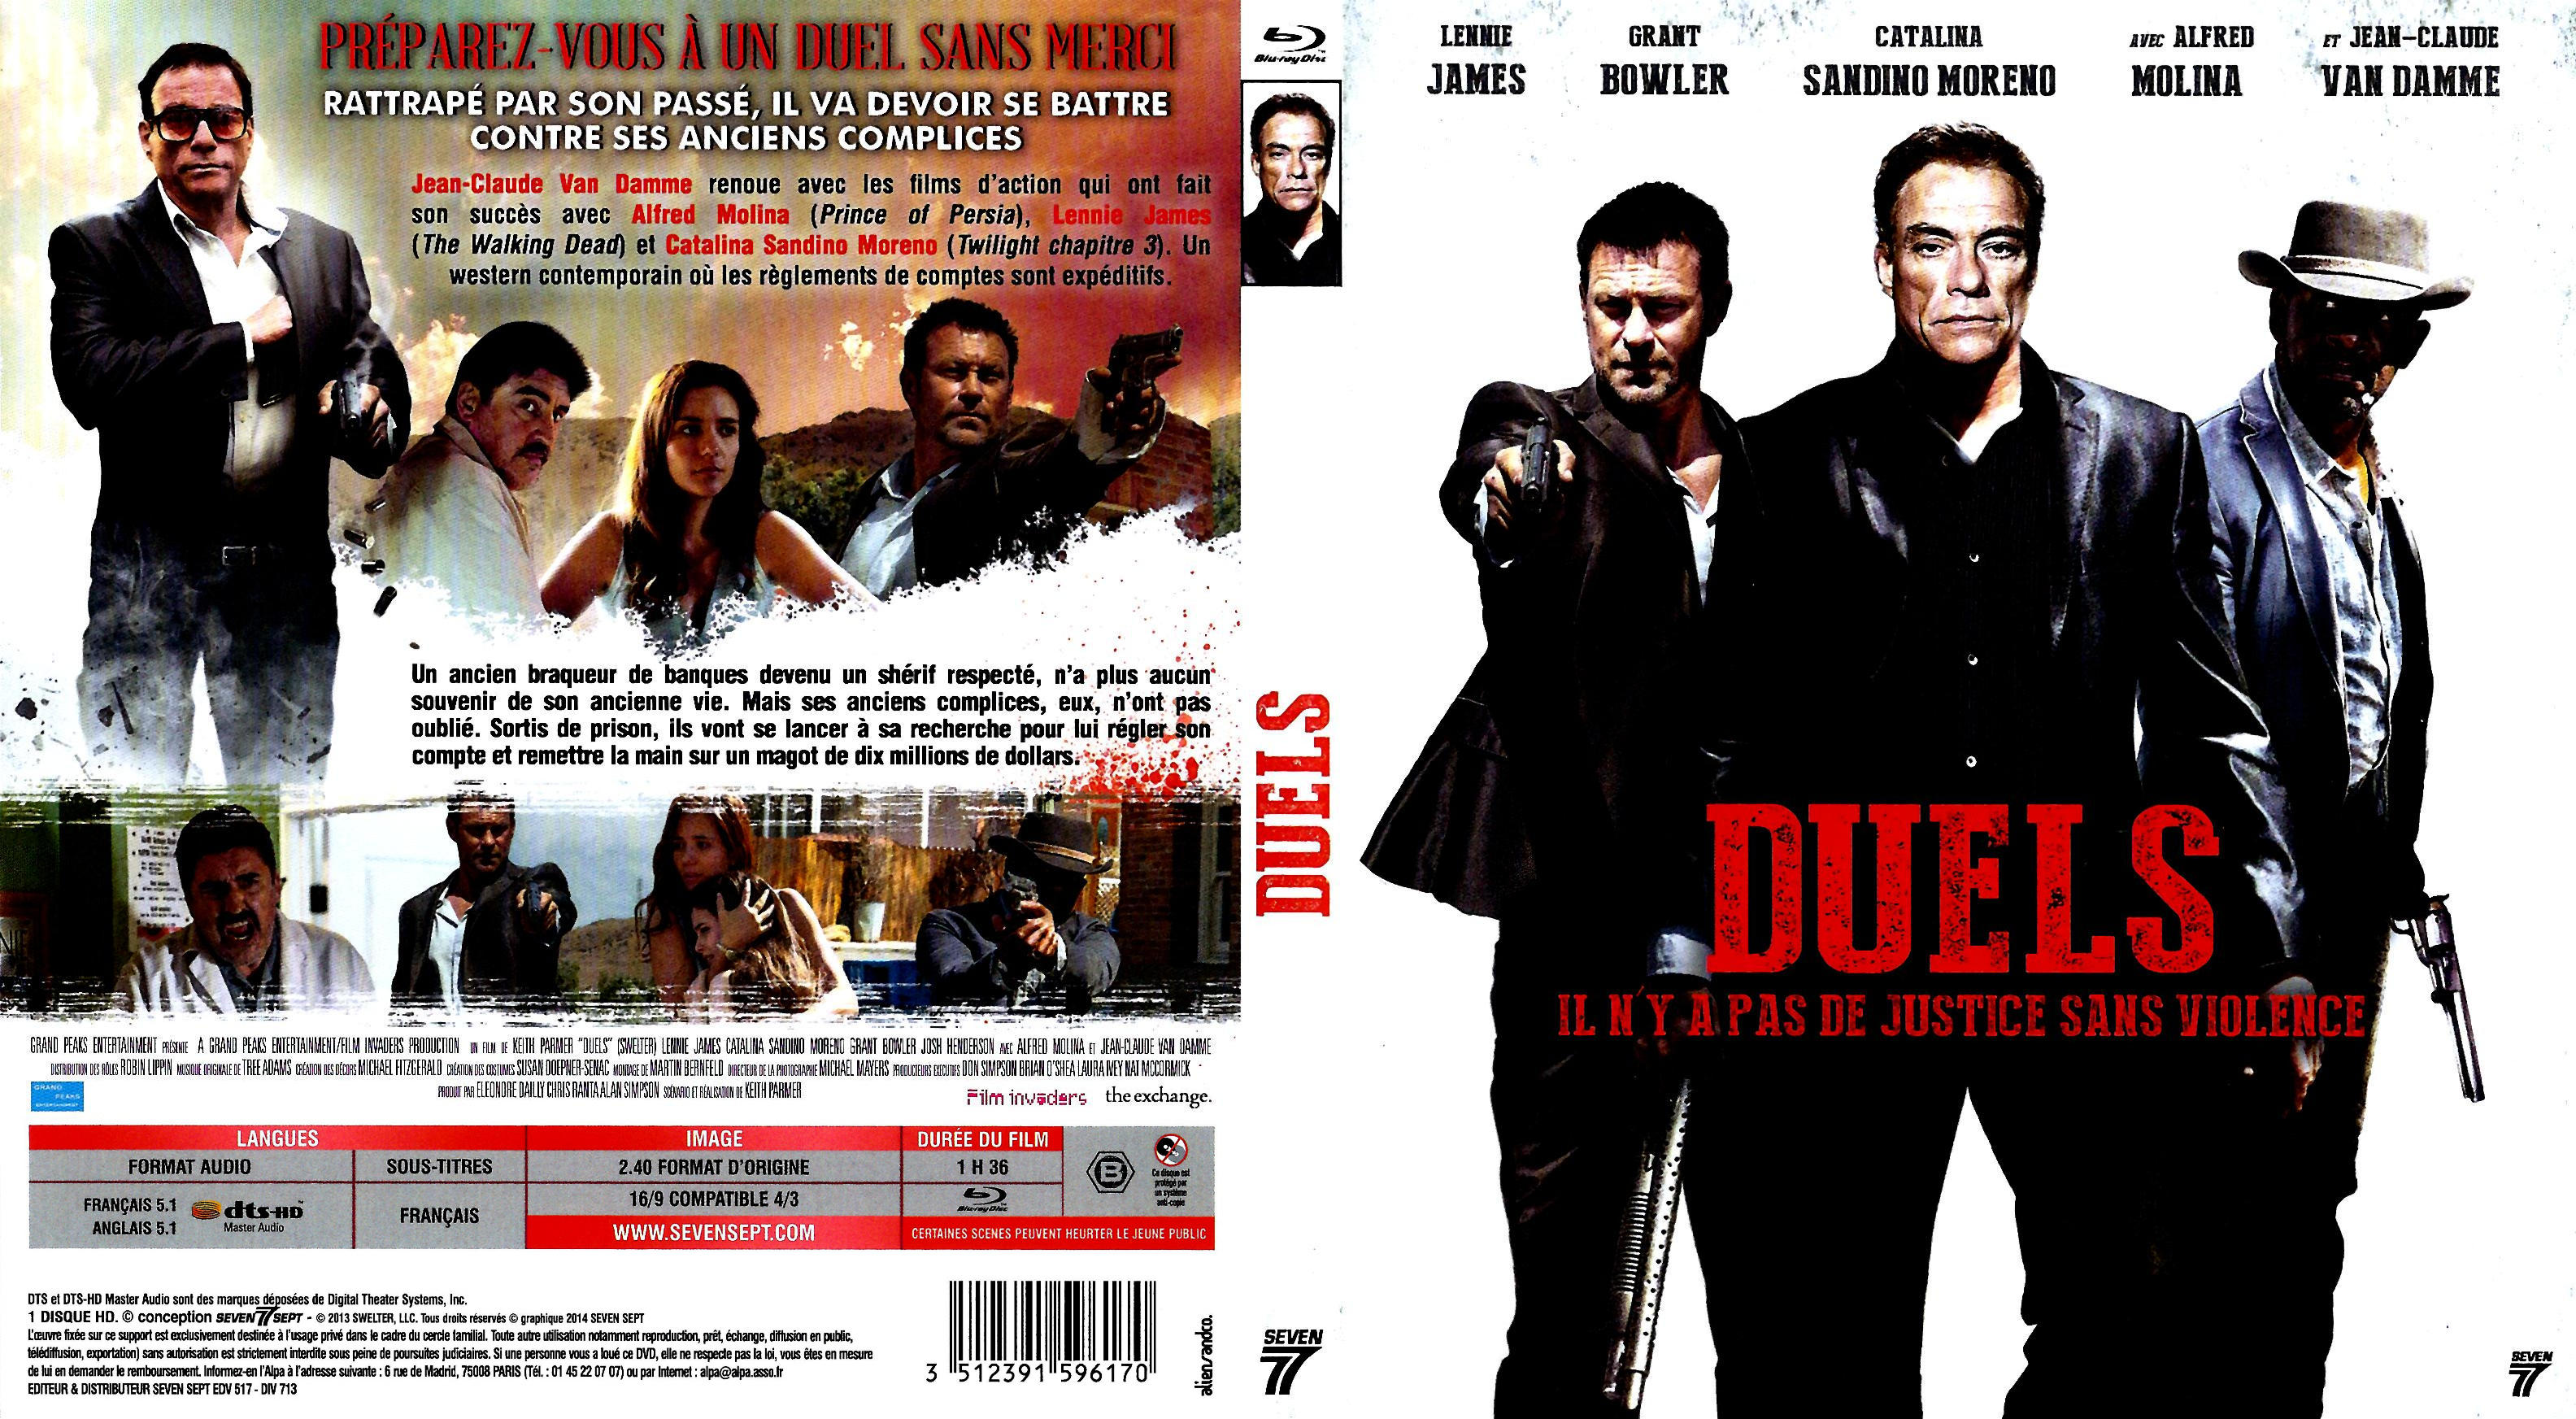 Jaquette DVD Duels (BLU-RAY)